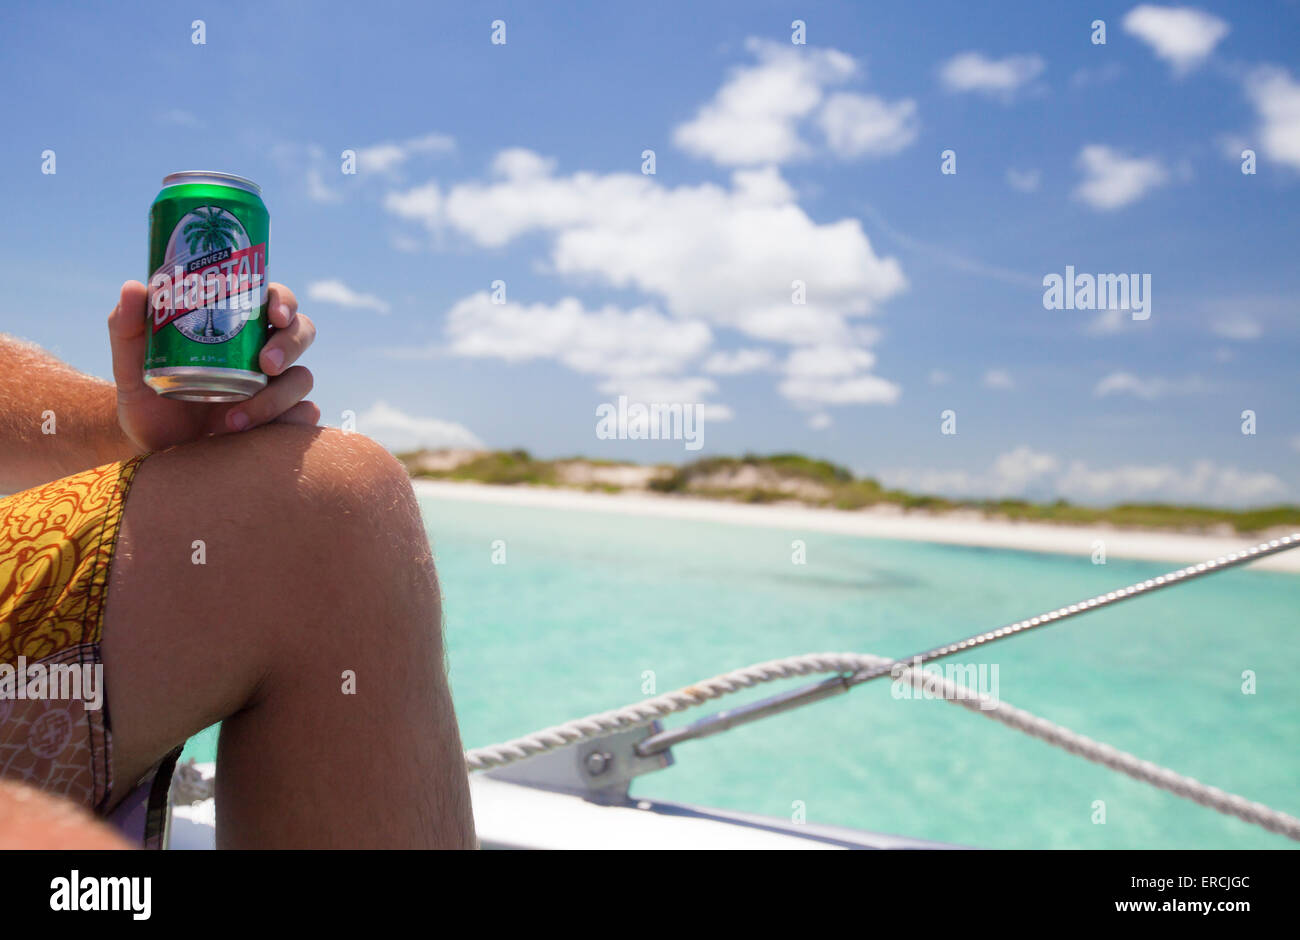 A male tourist drinks Cristal Beer on a boat while on vacation in Cuba. Stock Photo